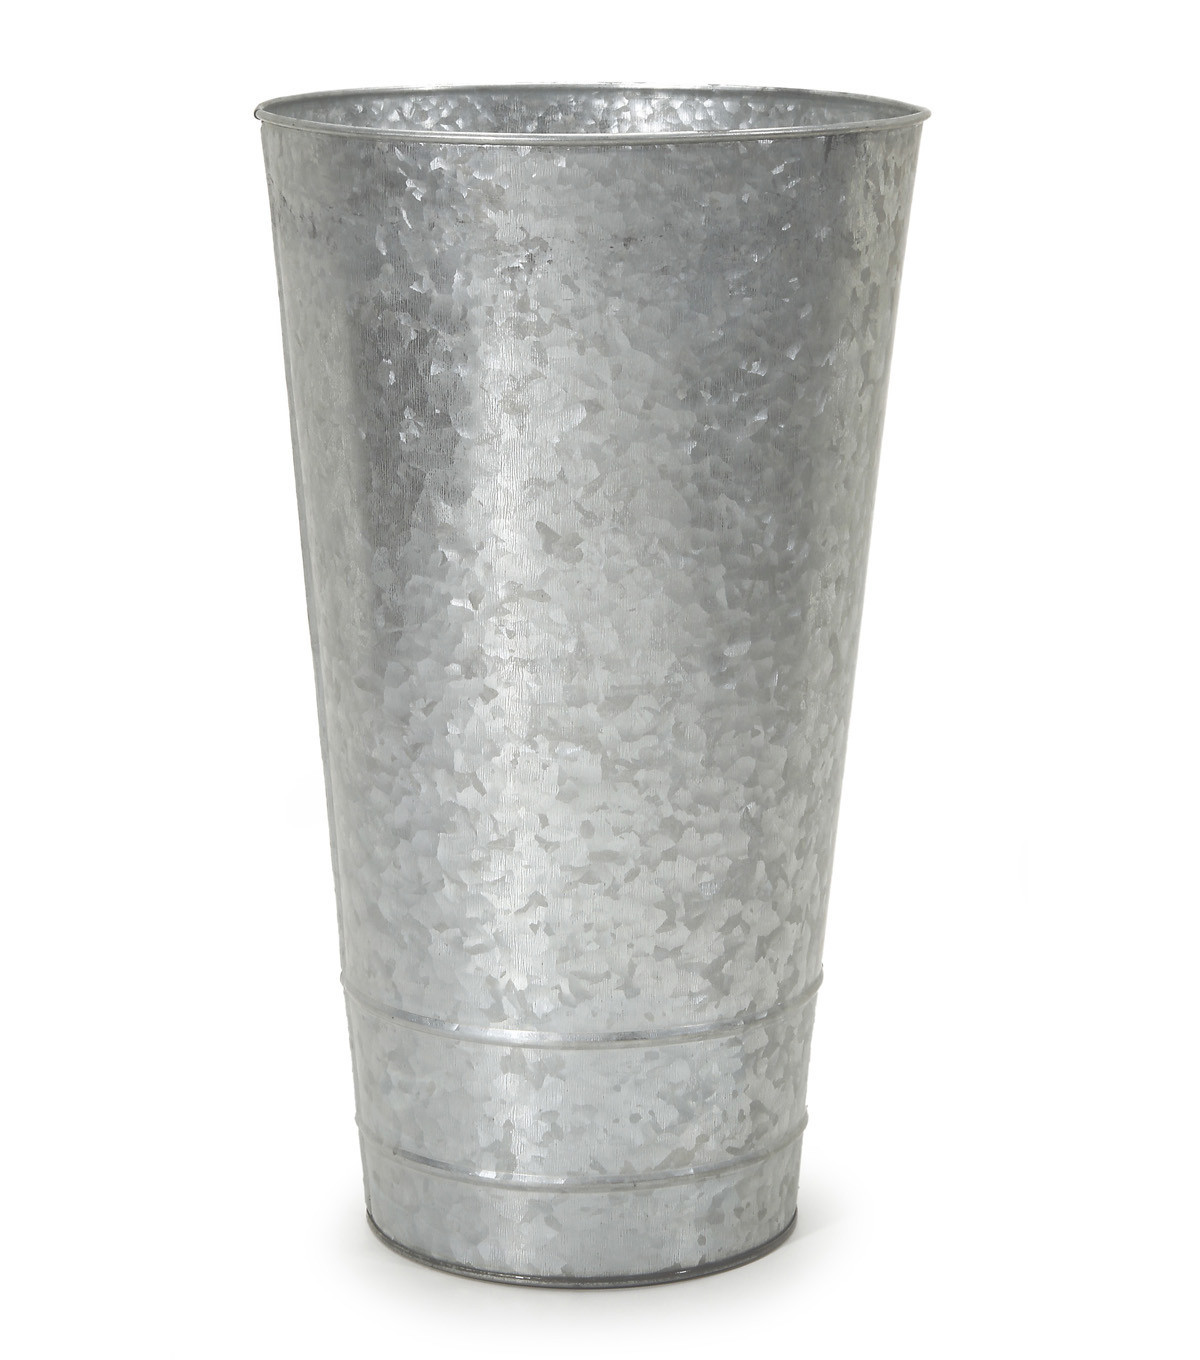 18 Unique Tin Wall Pocket Vases 2024 free download tin wall pocket vases of tall galvanized vase pictures french tall bucket galvanized wall with tall galvanized vase gallery galvanized french vase vase and cellar image avorcor of tall galva